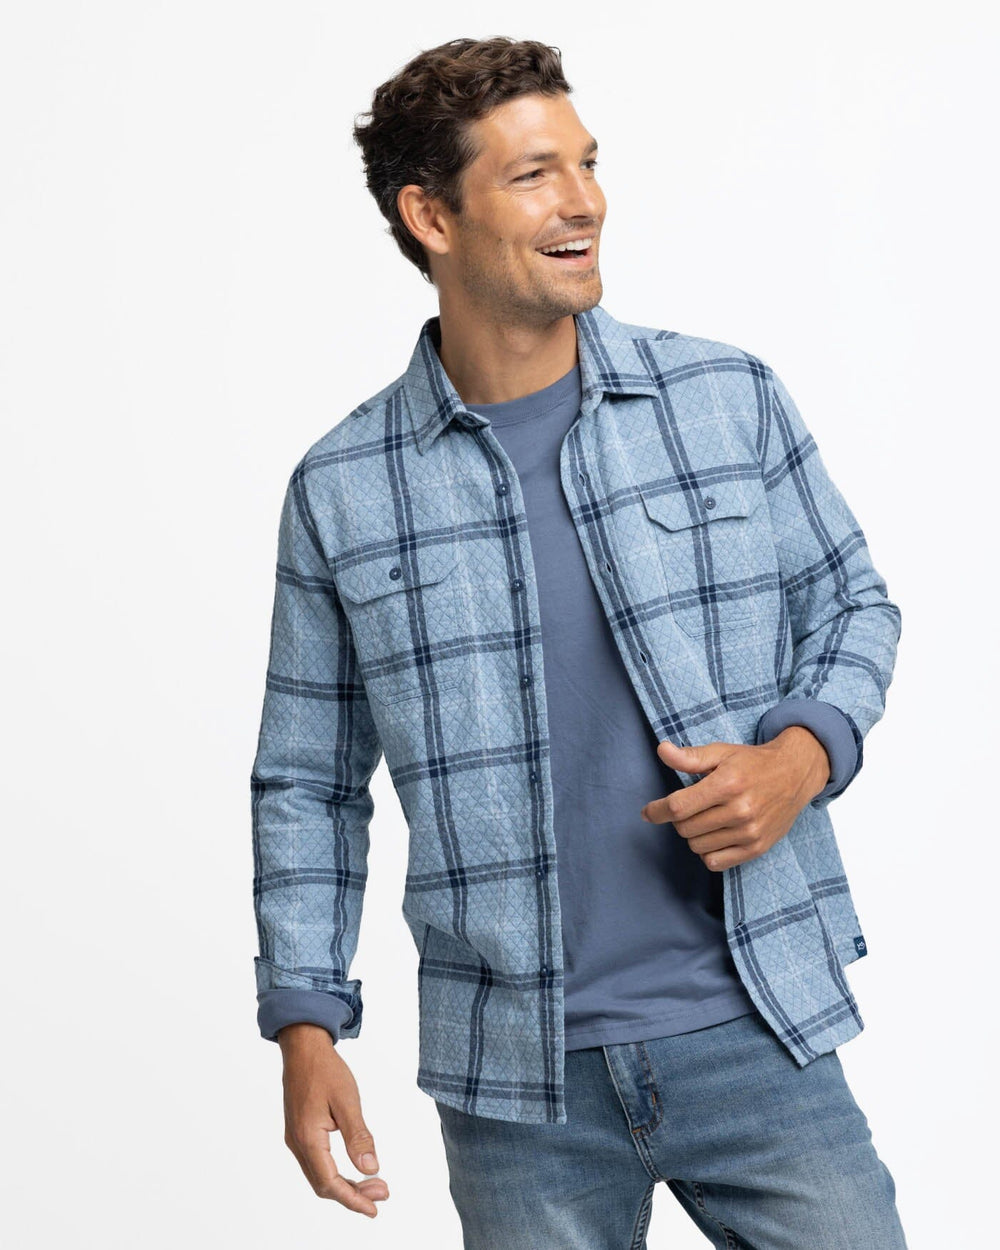 The front view of the Southern Tide Quilted Heather Ellison Plaid Overshirt Sport Shirt by Southern Tide - Heather Mountain Spring Blue